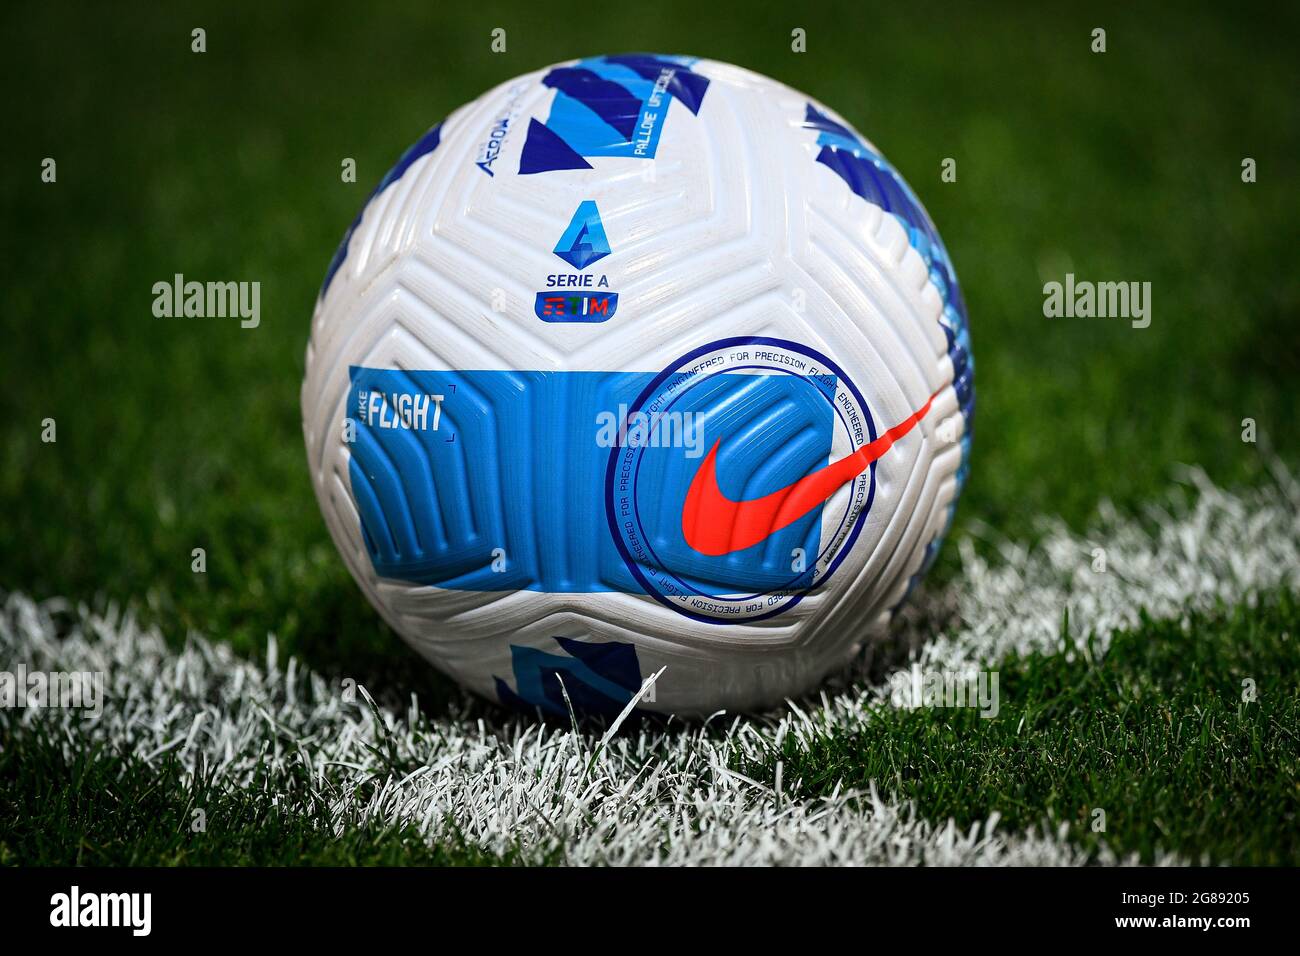 Lugano, Switzerland. 17 July 2021. Official Serie A match ball 'Nike  Flight' is seen during the pre-season friendly football match between FC  Lugano and FC Internazionale. Regular time ended 2-2, FC Internazionale